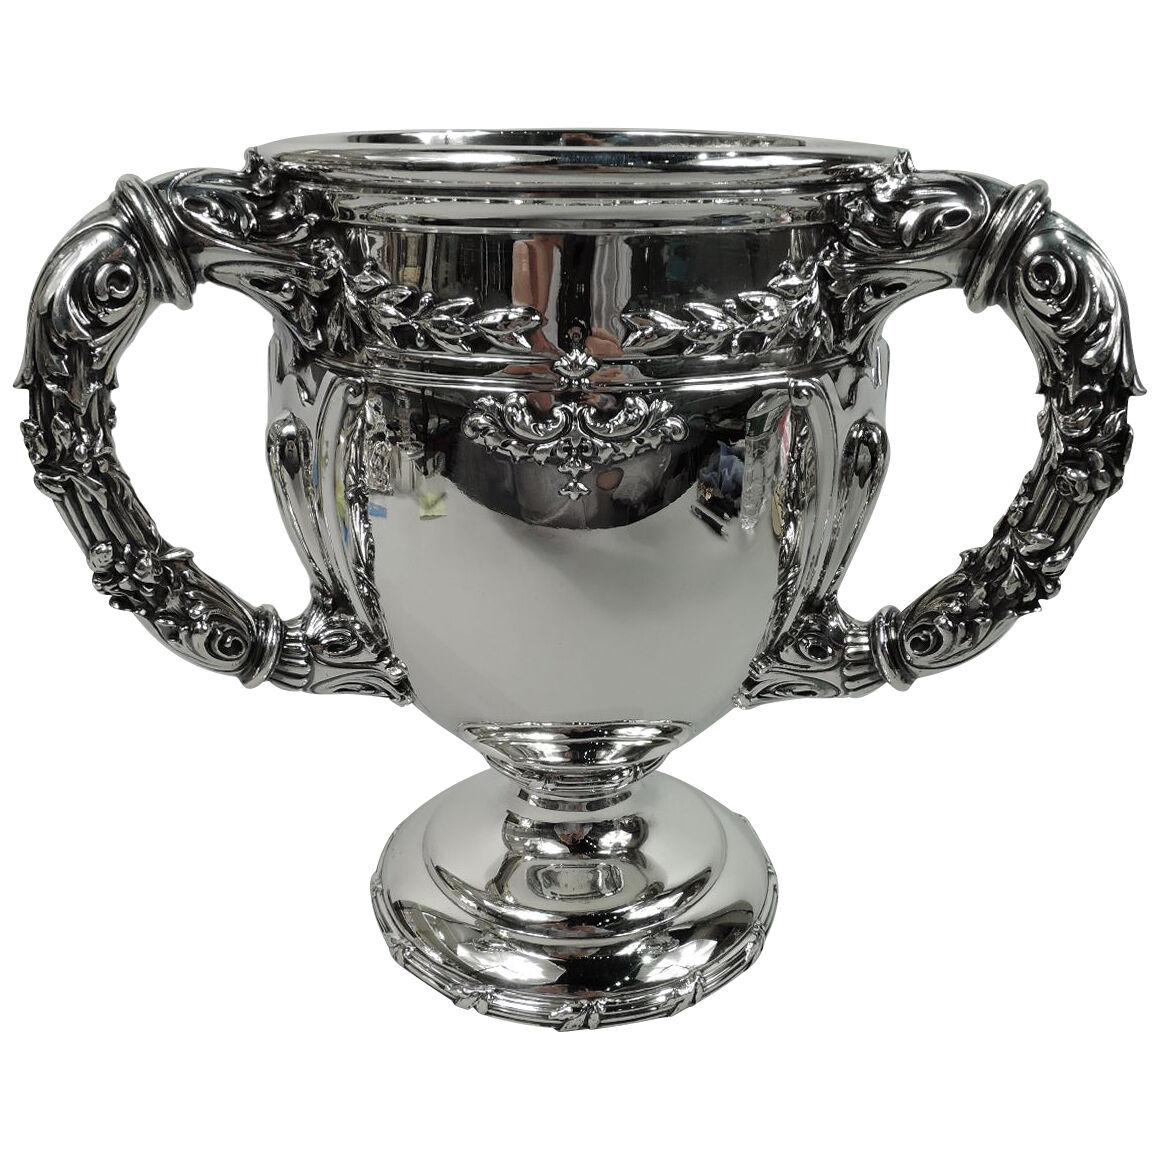 Finest-Quality Gilded Age American Sterling Silver Loving Cup Trophy